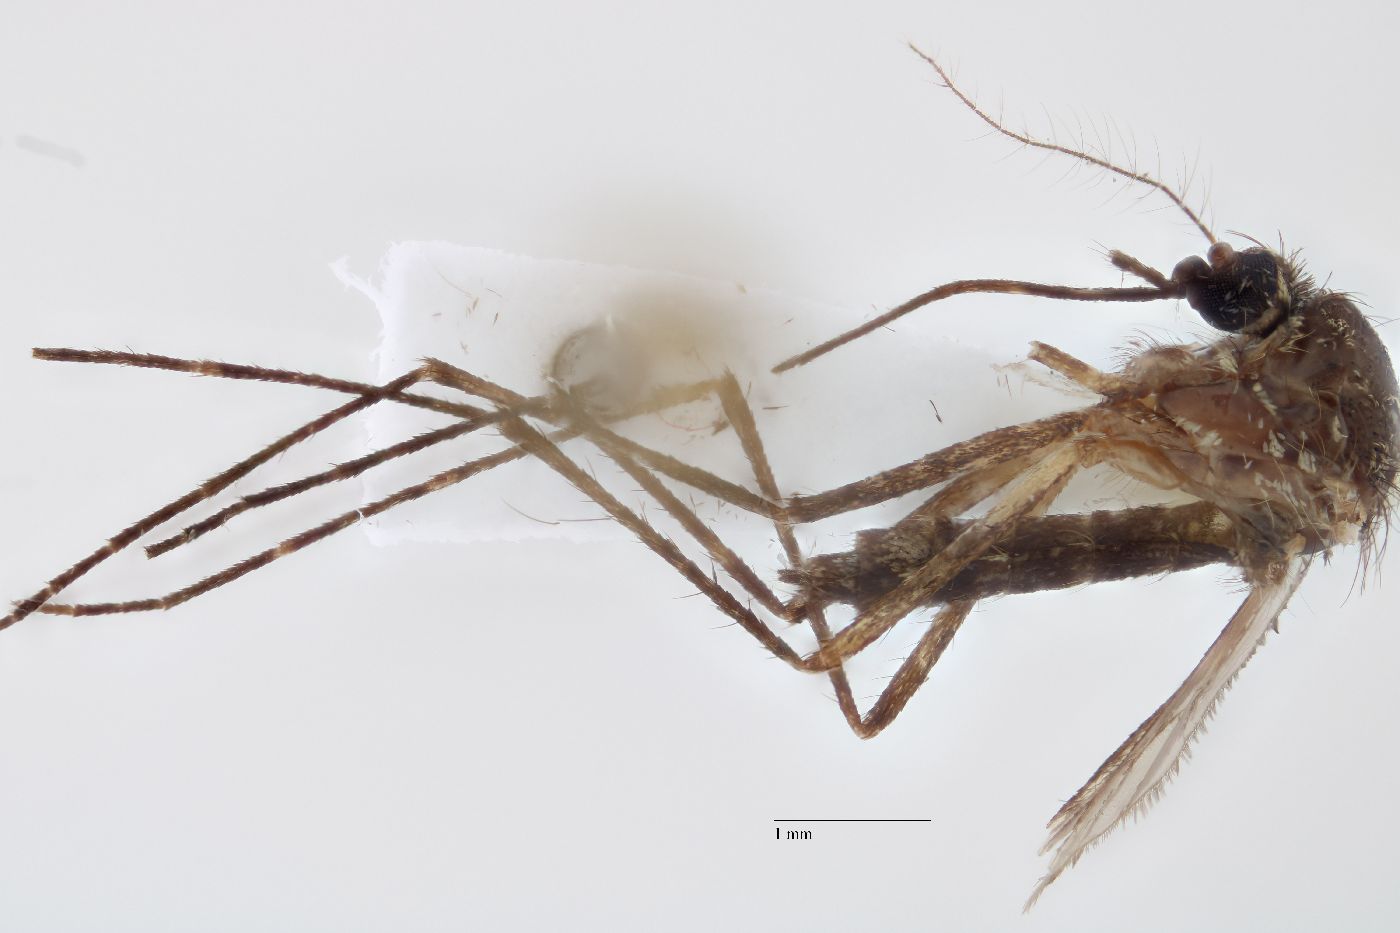 Aedes canadensis mathesoni image